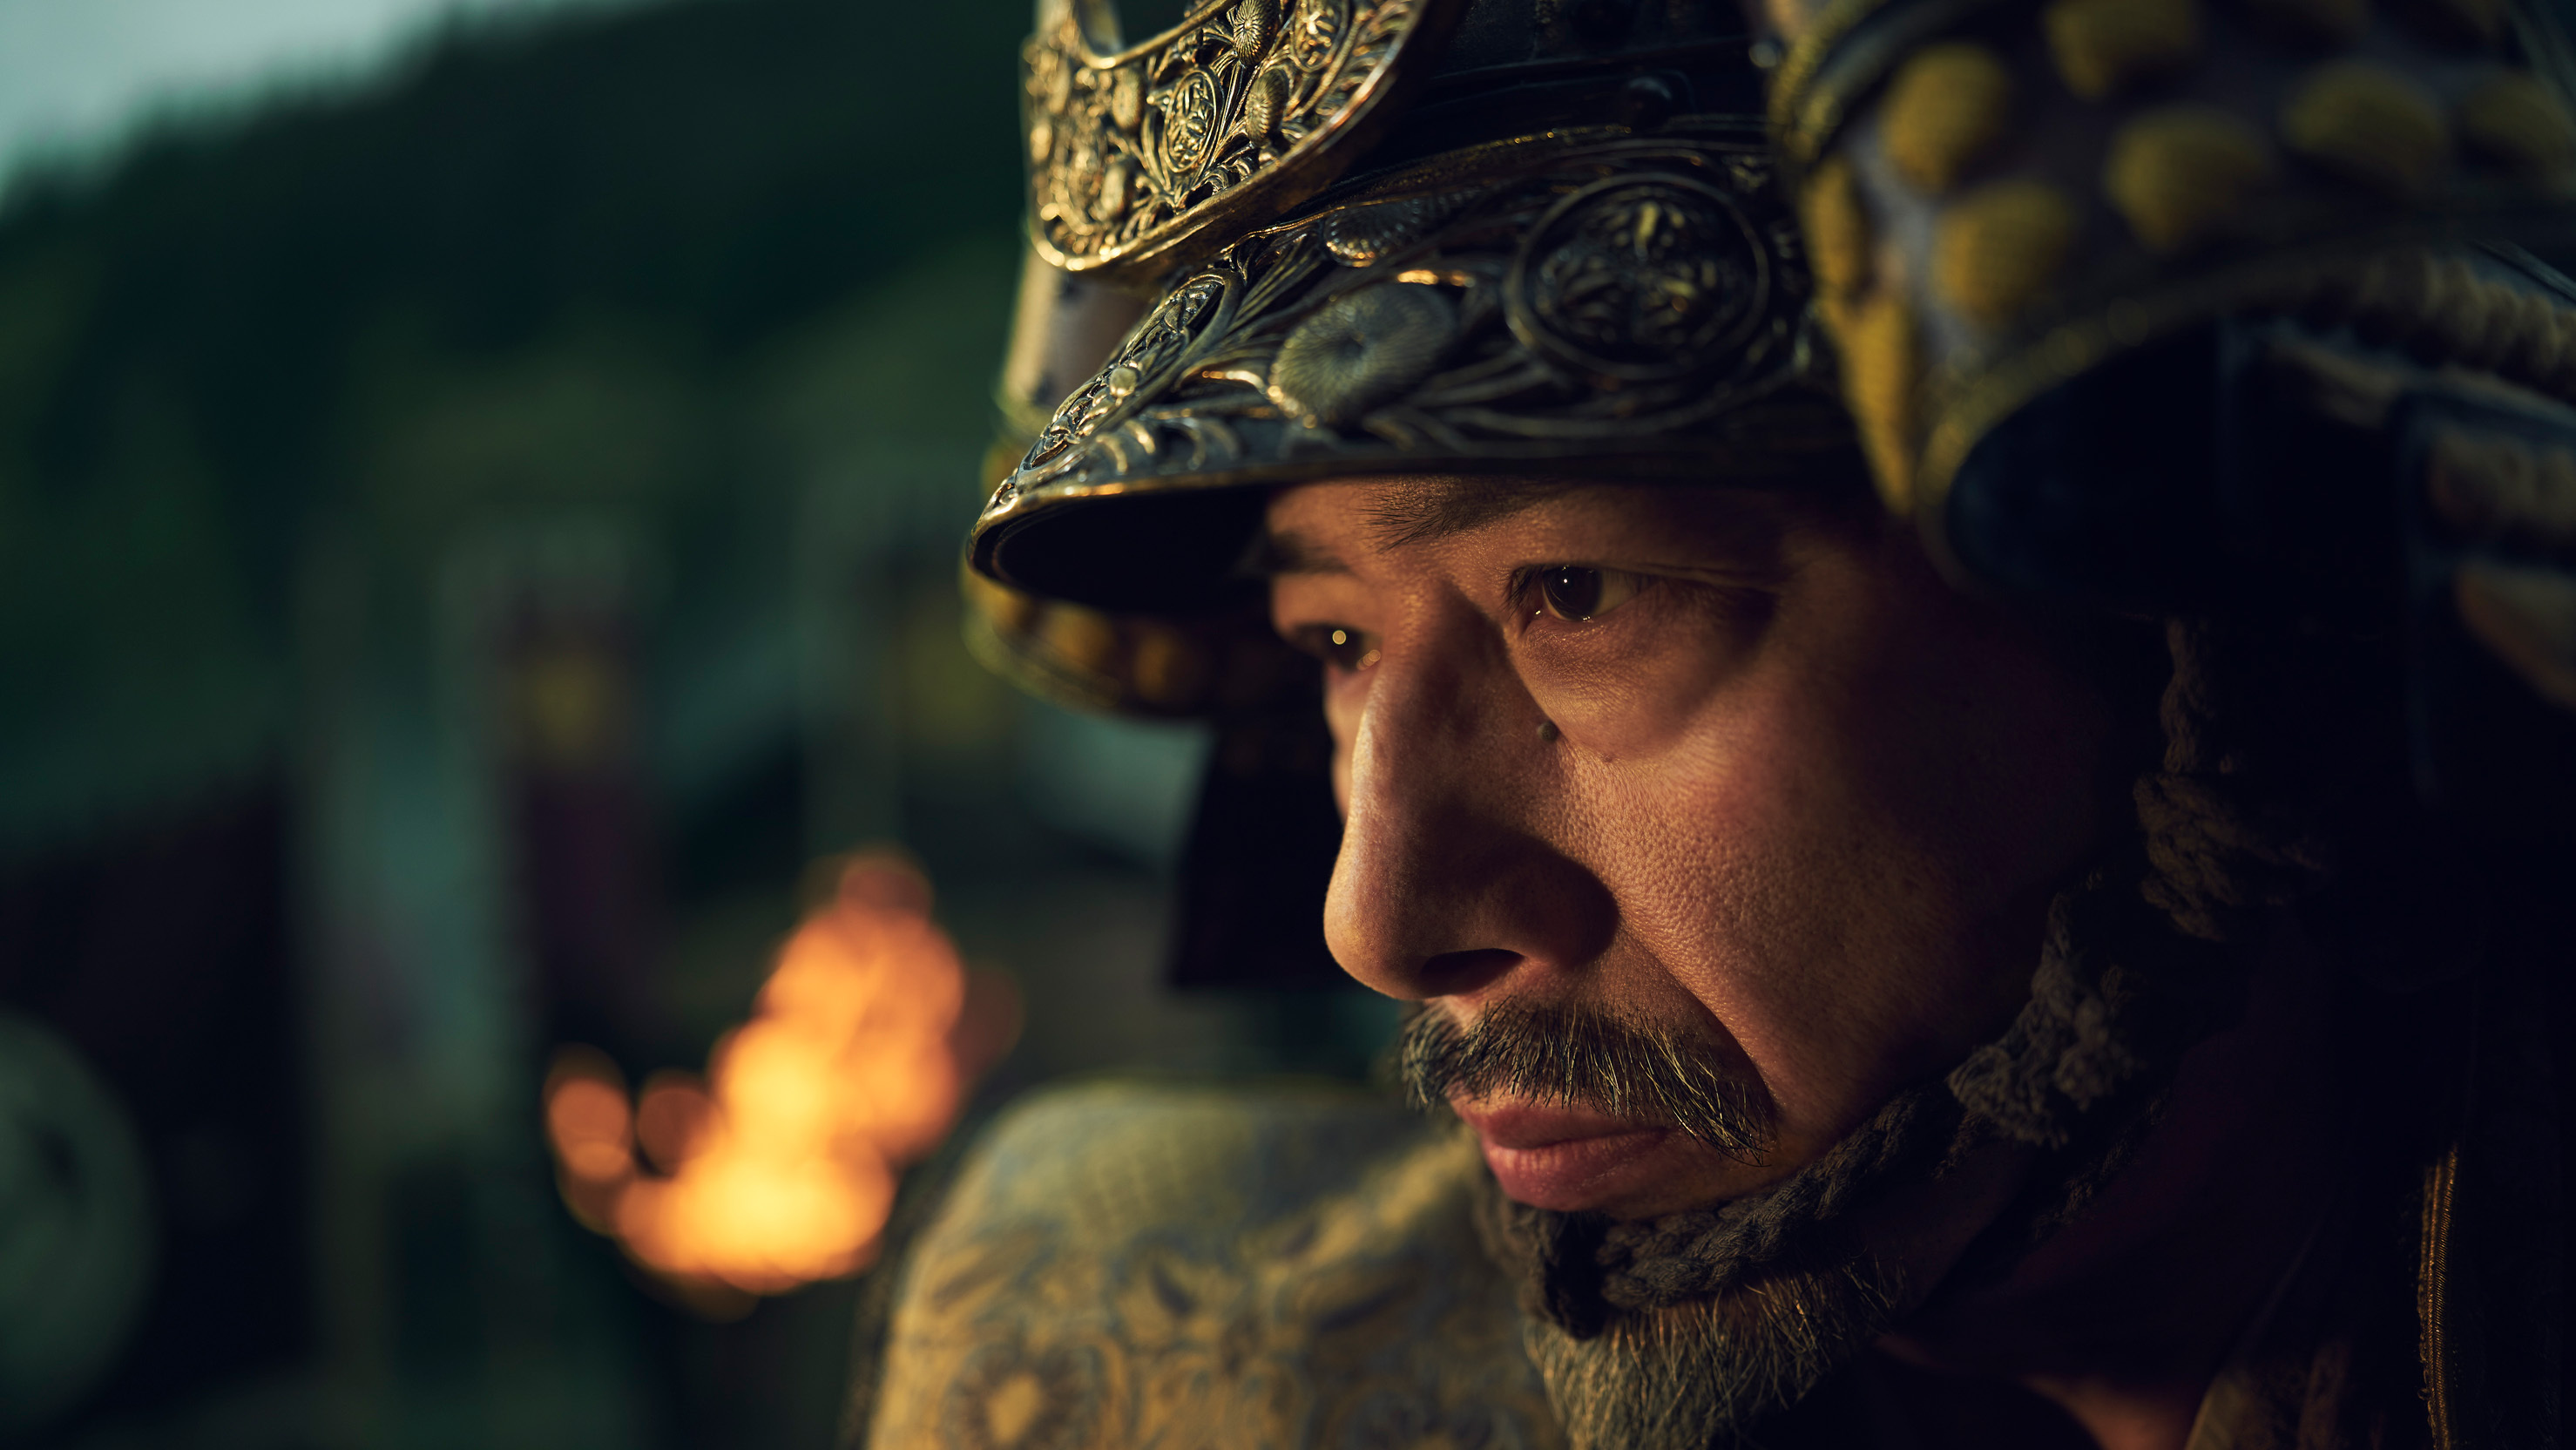 An image from Shogun, the new FX show